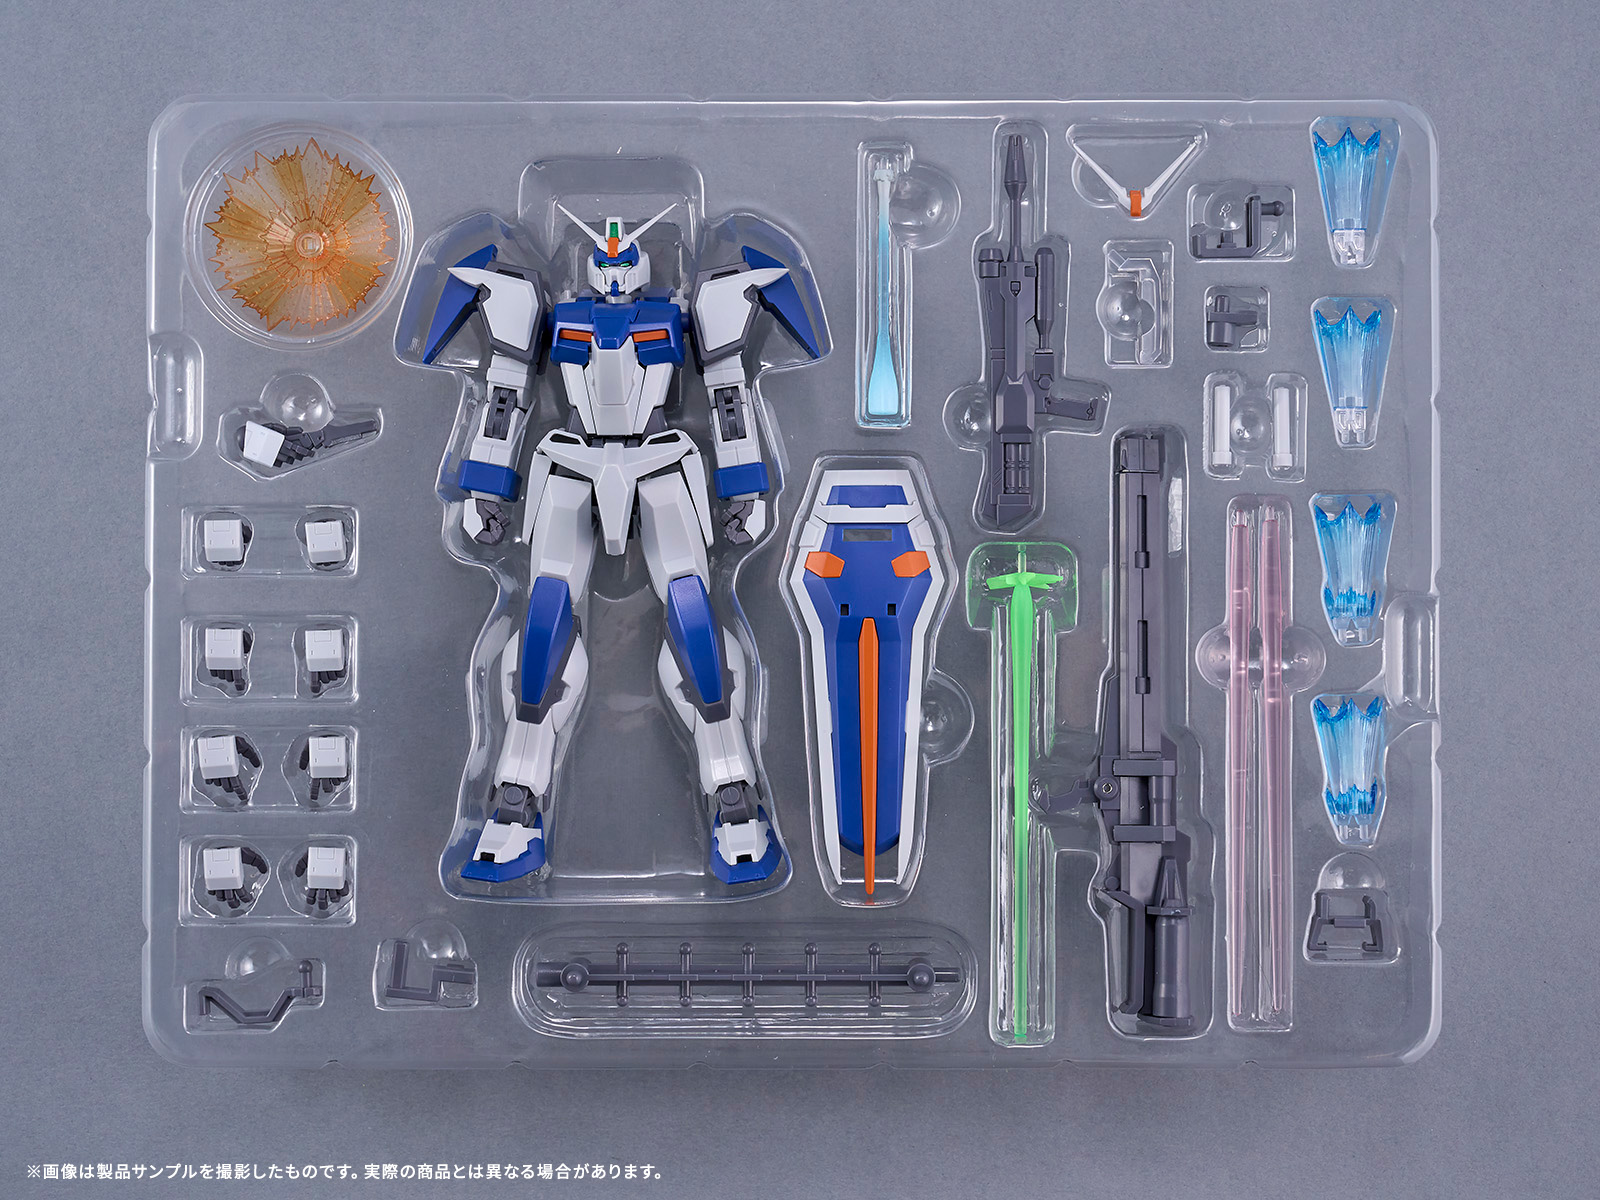 Introducing GAT-X102 DUEL GUNDAM from the ROBOT SPIRITS ver. A.N.I.M.E. series! Released March 25!